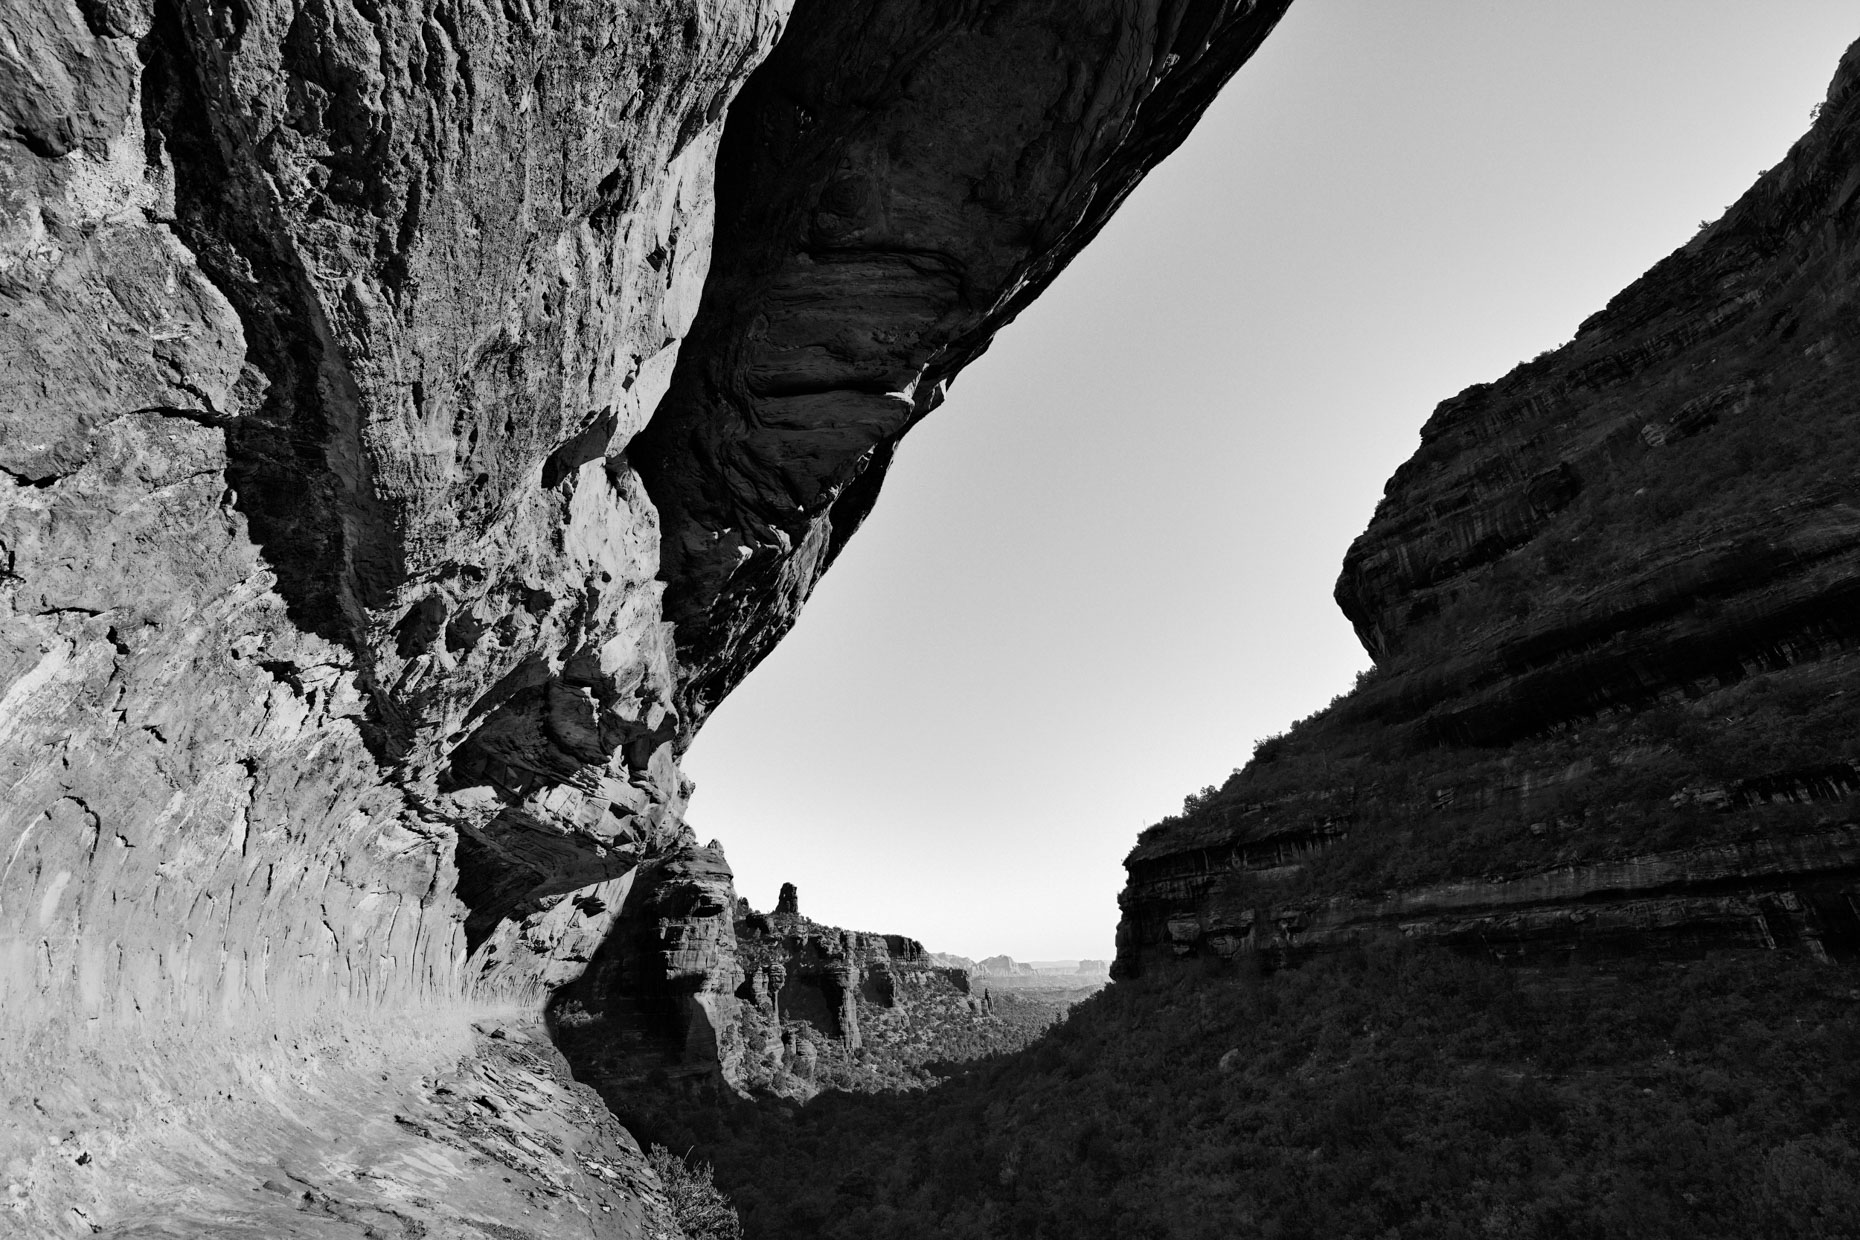 Canyon walls with formation in distance-b&w landscape arid Western canyon wall Fey Canyon Arizona